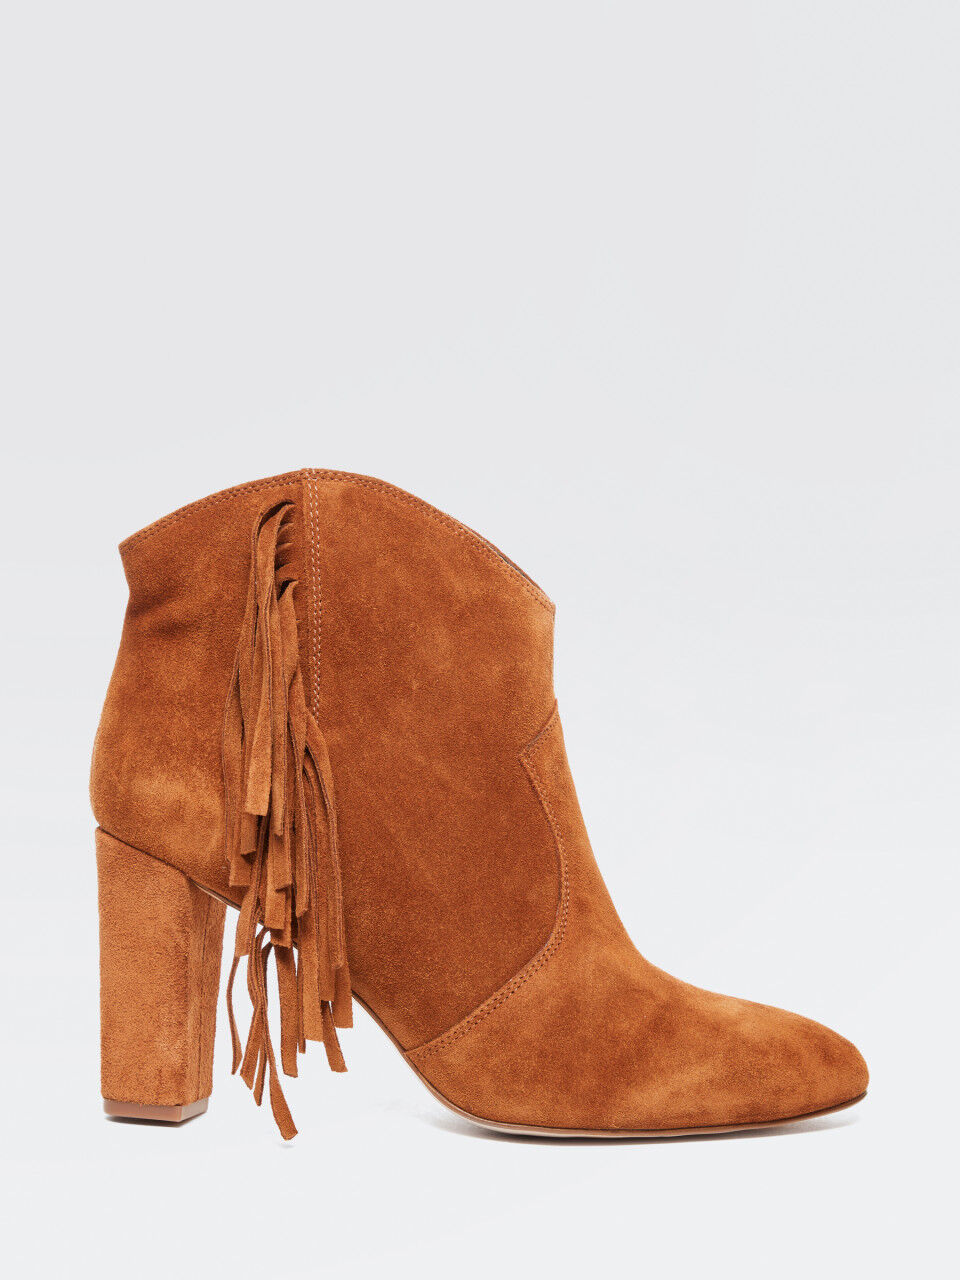 Suede ankle boots with fringe